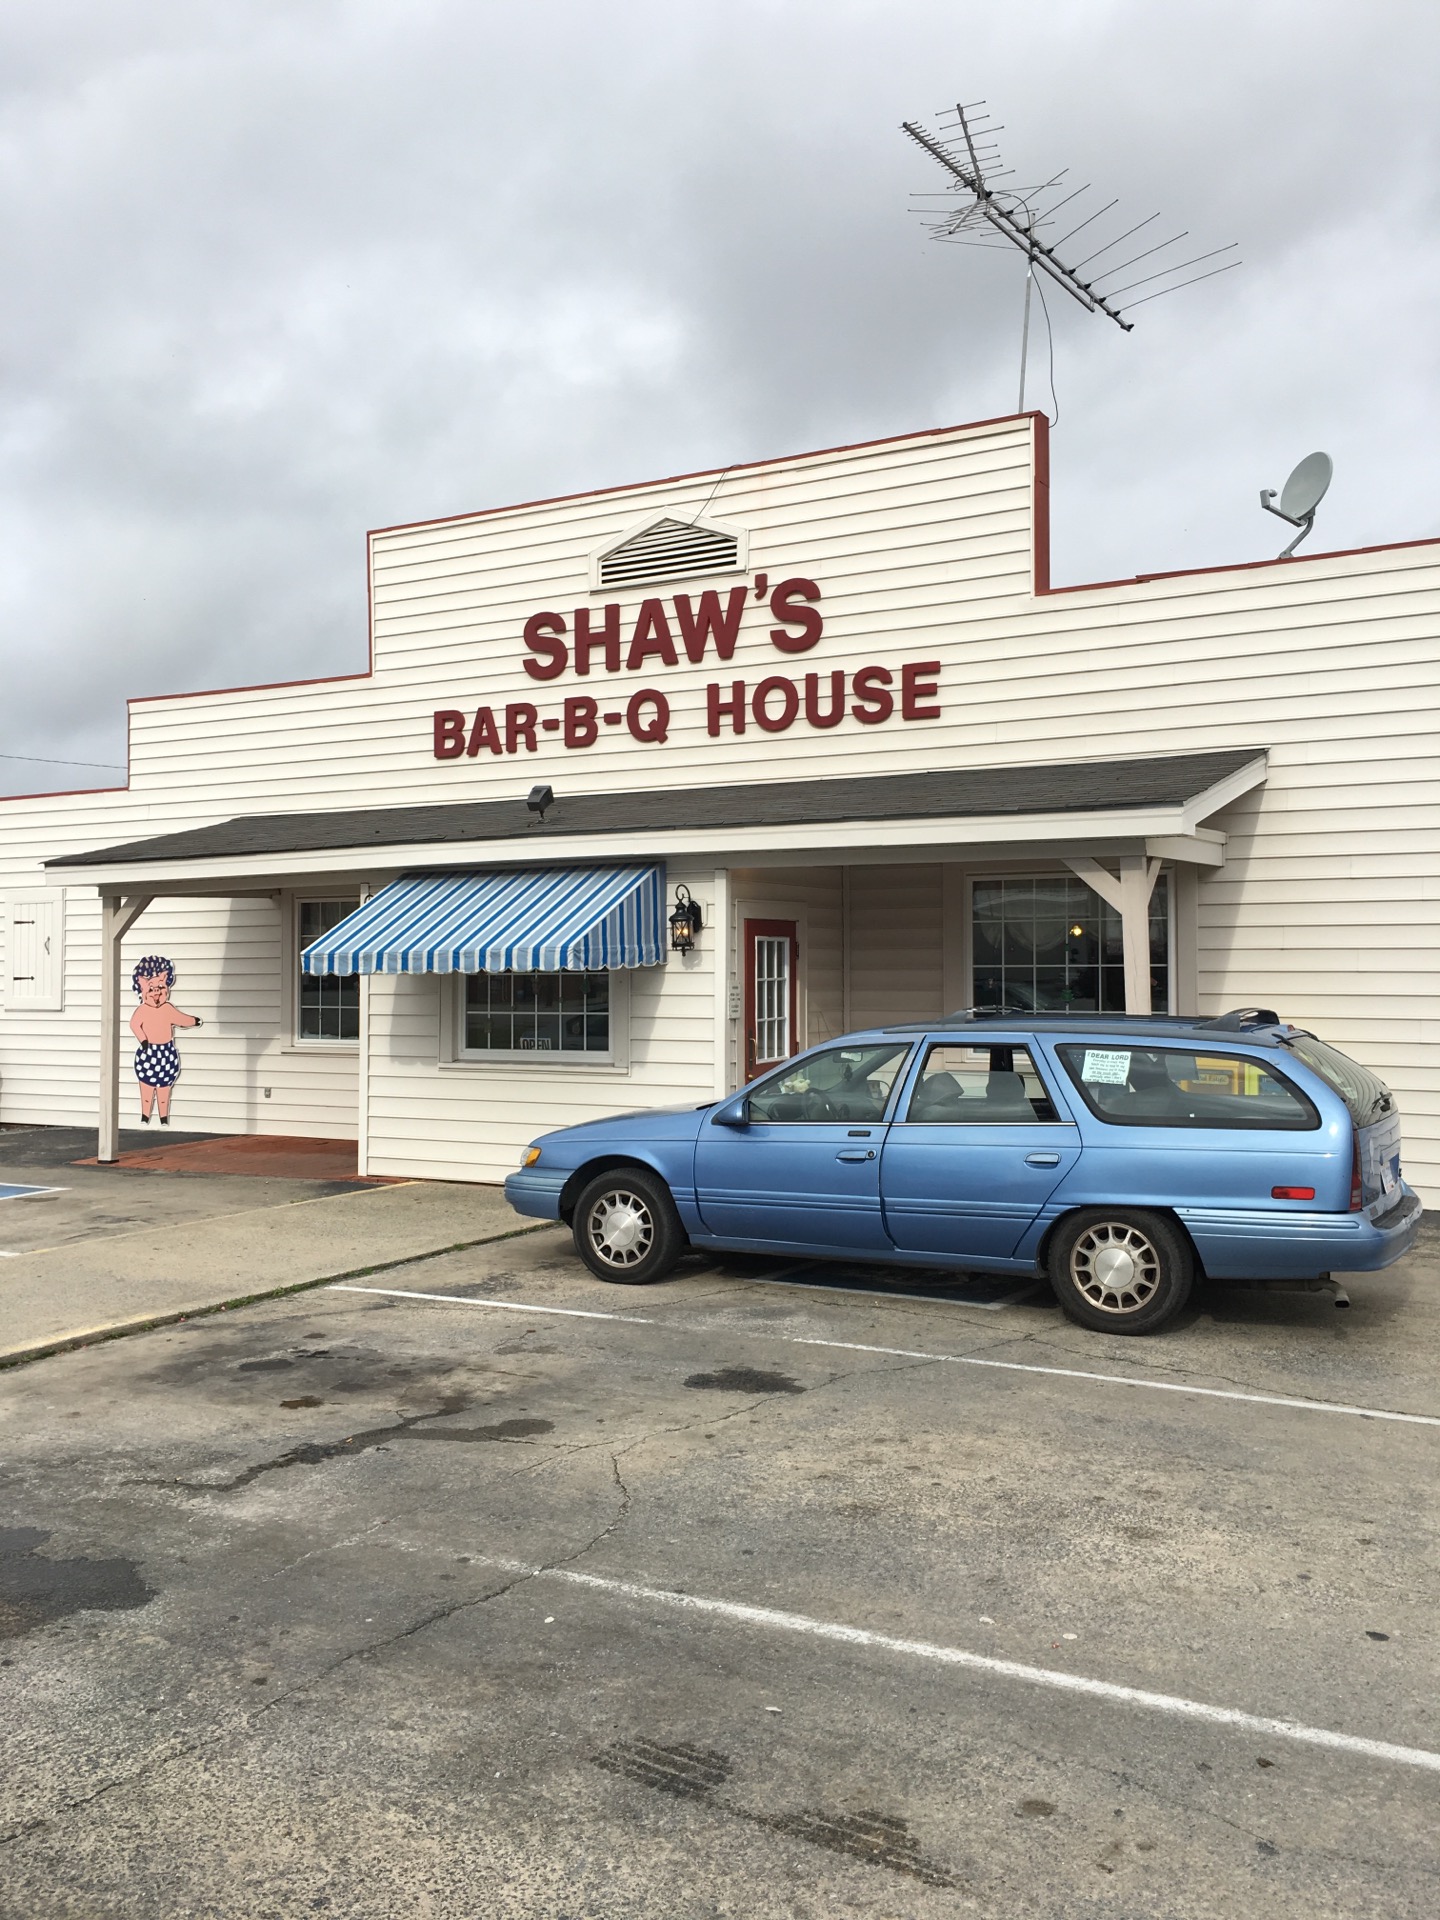 shaw's barbecue house 47/人 西餐 直线距离4.8km